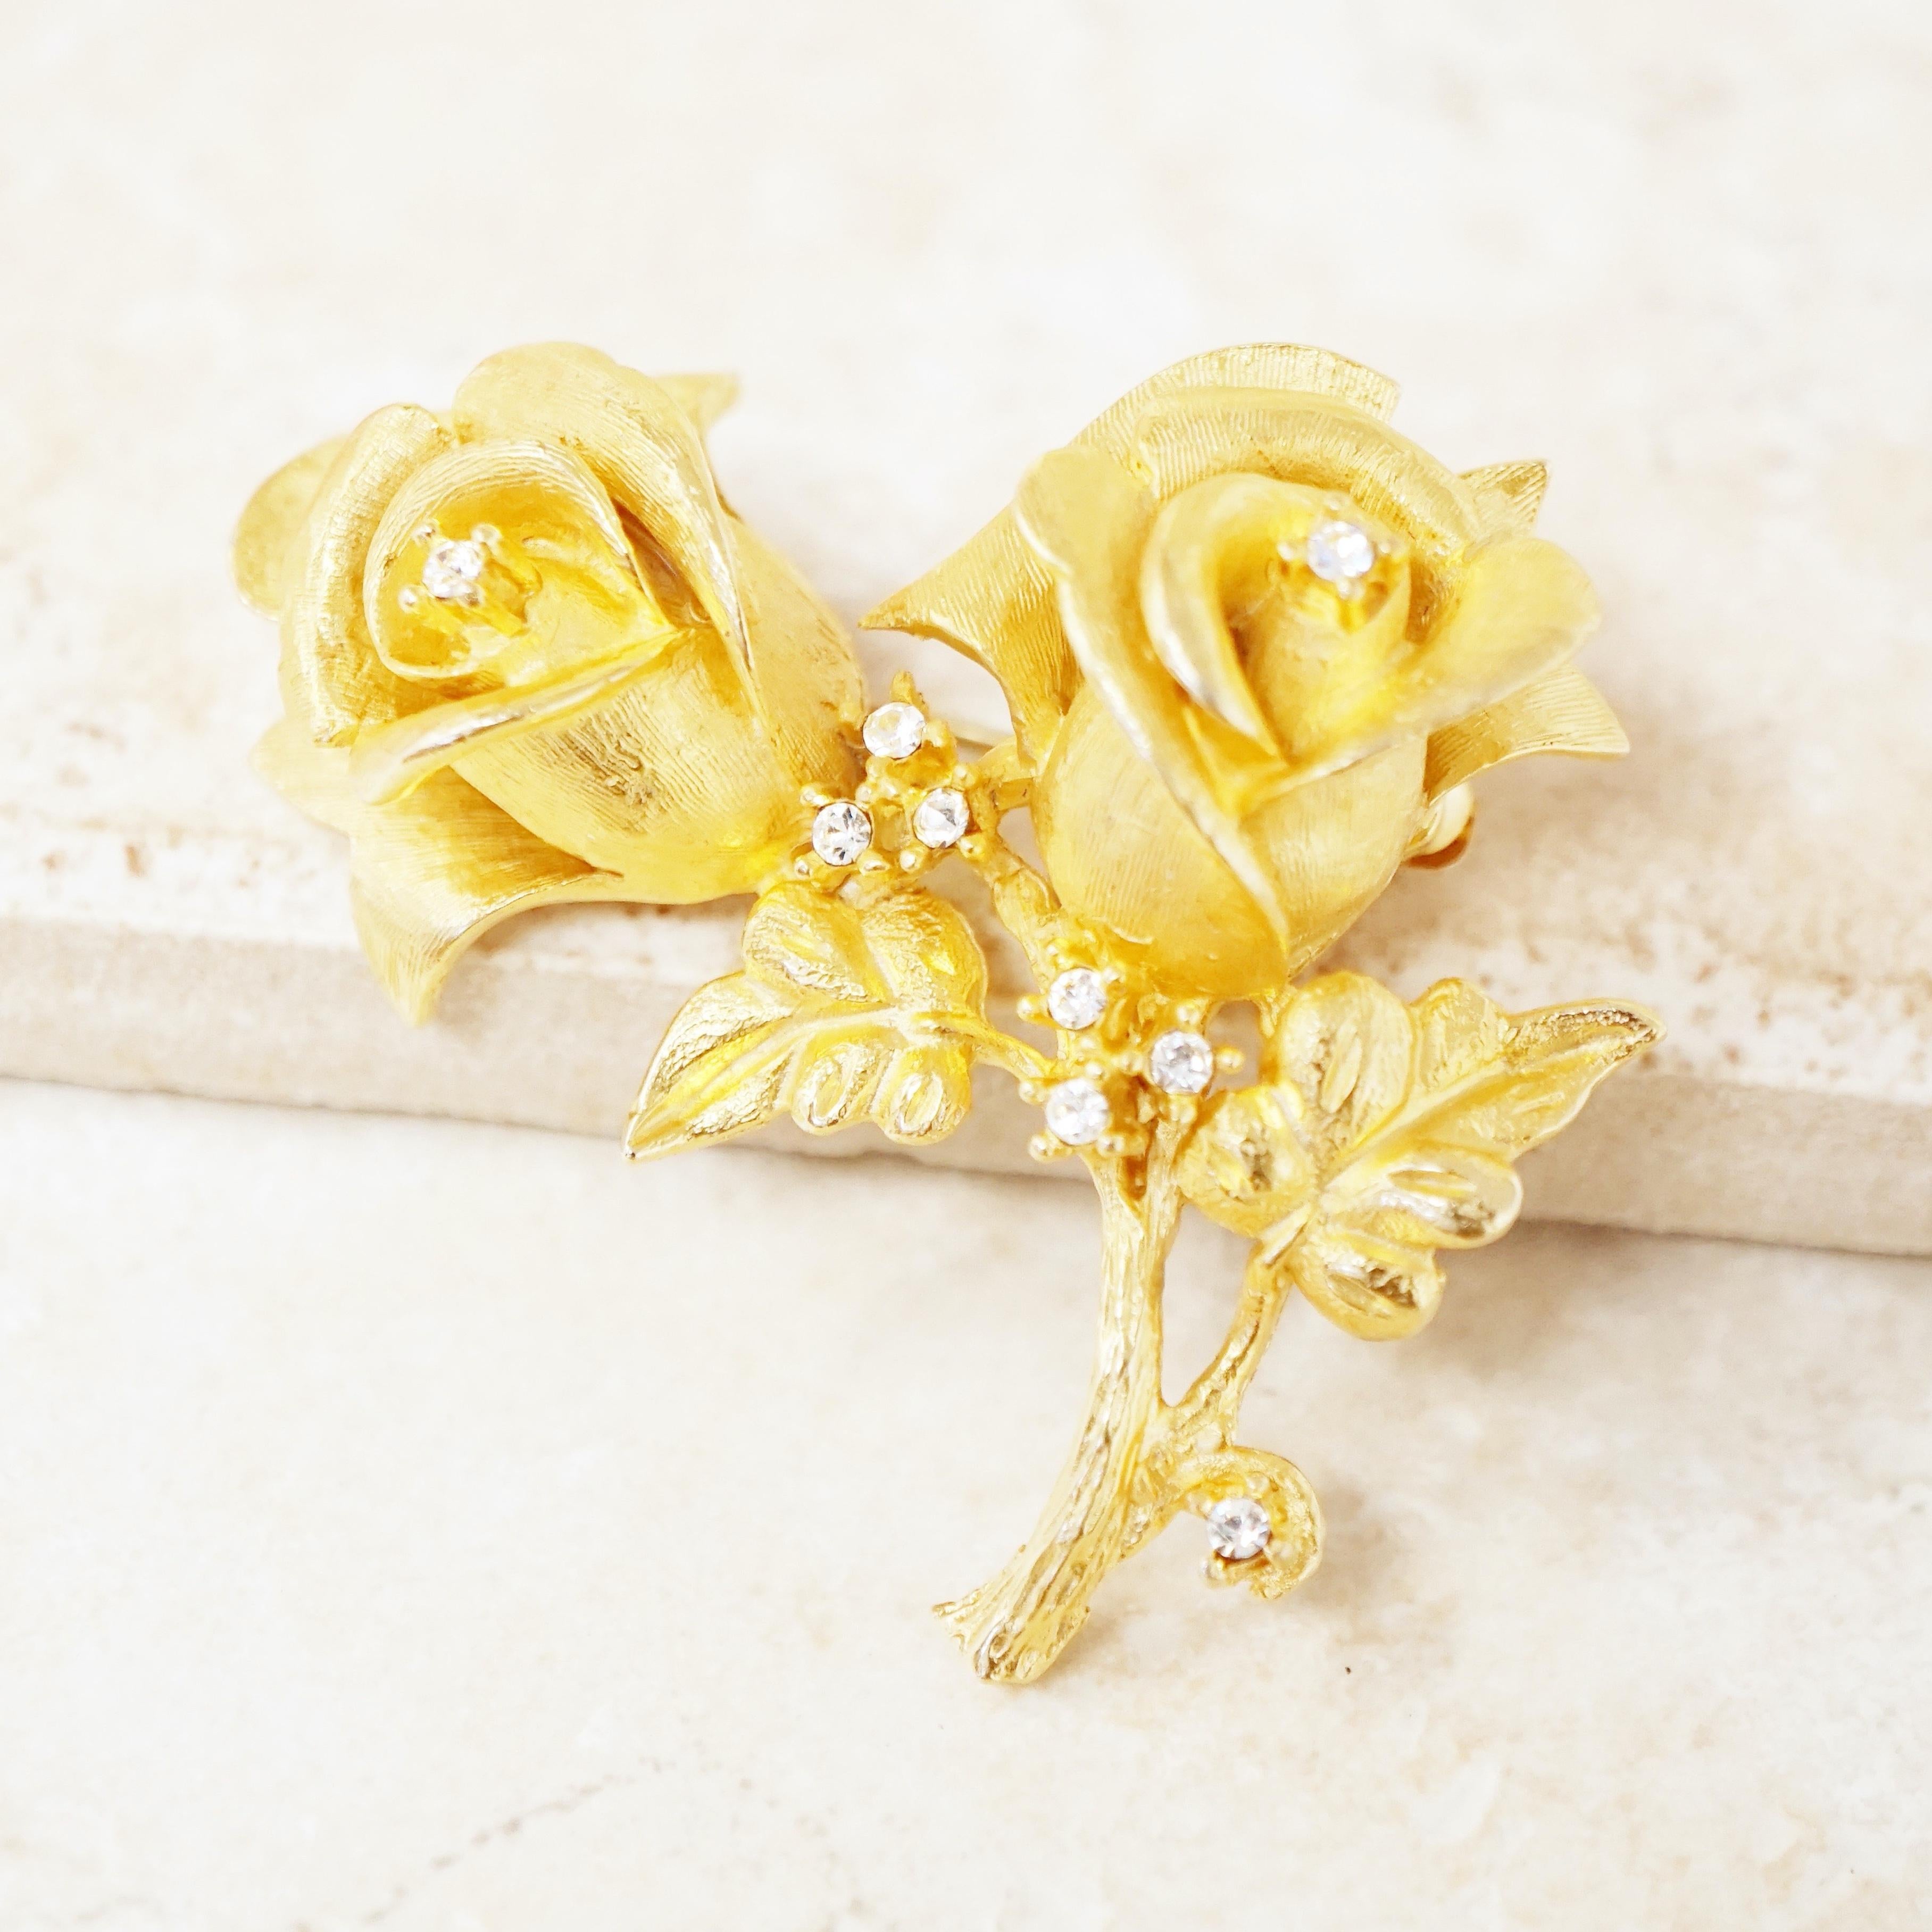 Modern Vintage Gilded Rose Duo Brooch with Crystal Rhinestones by Erwin Pearl, 1990s